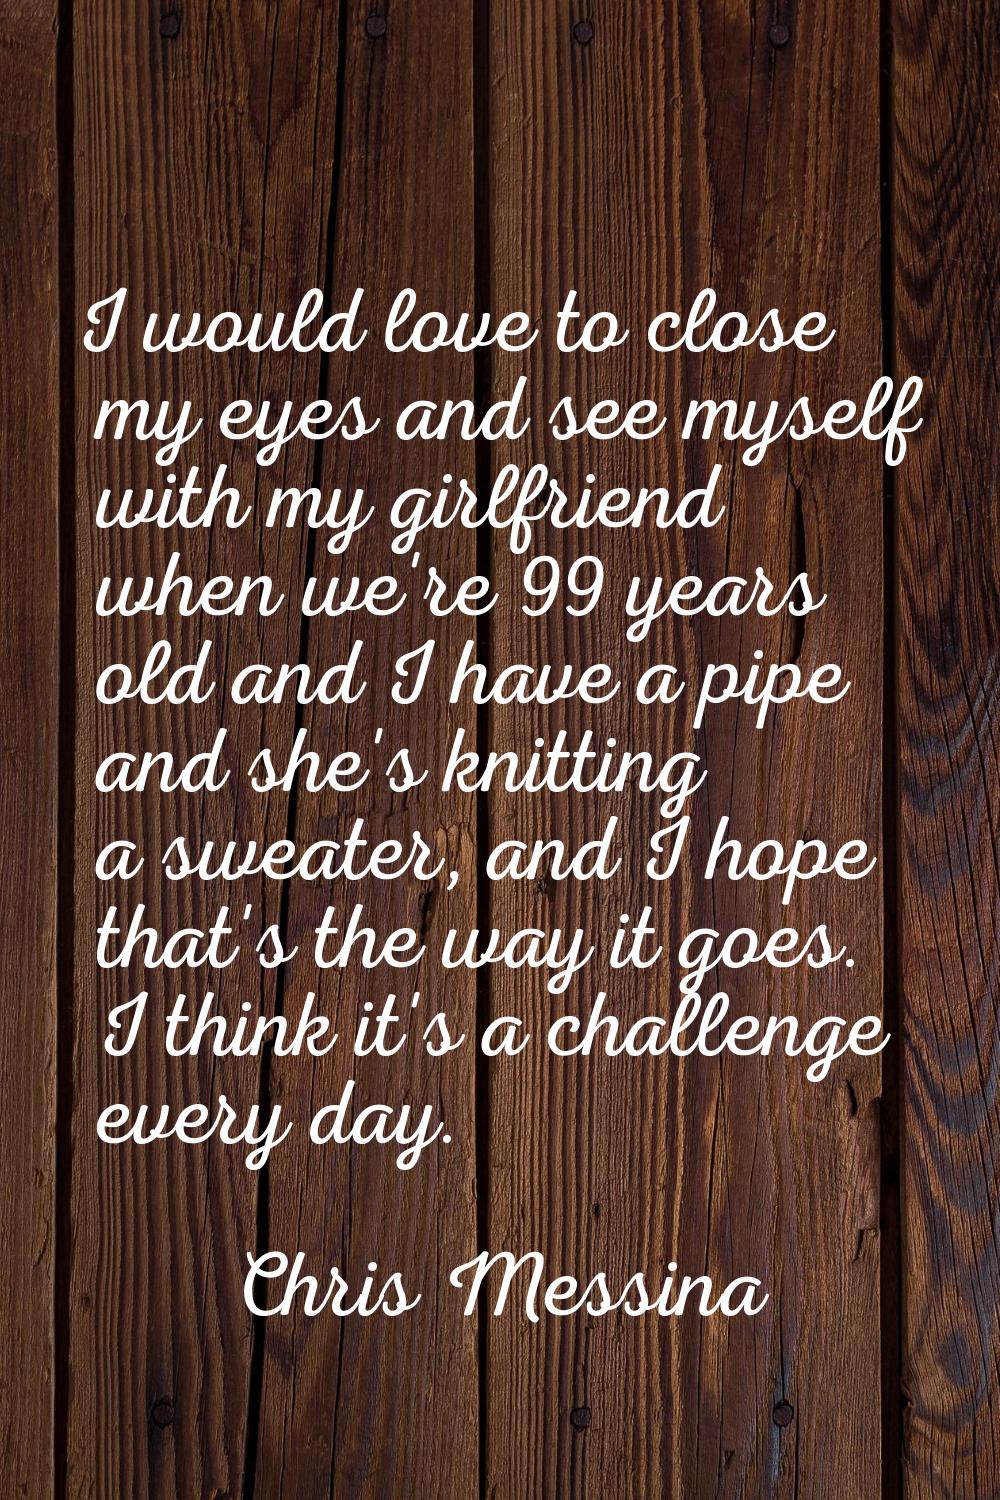 I would love to close my eyes and see myself with my girlfriend when we're 99 years old and I have 